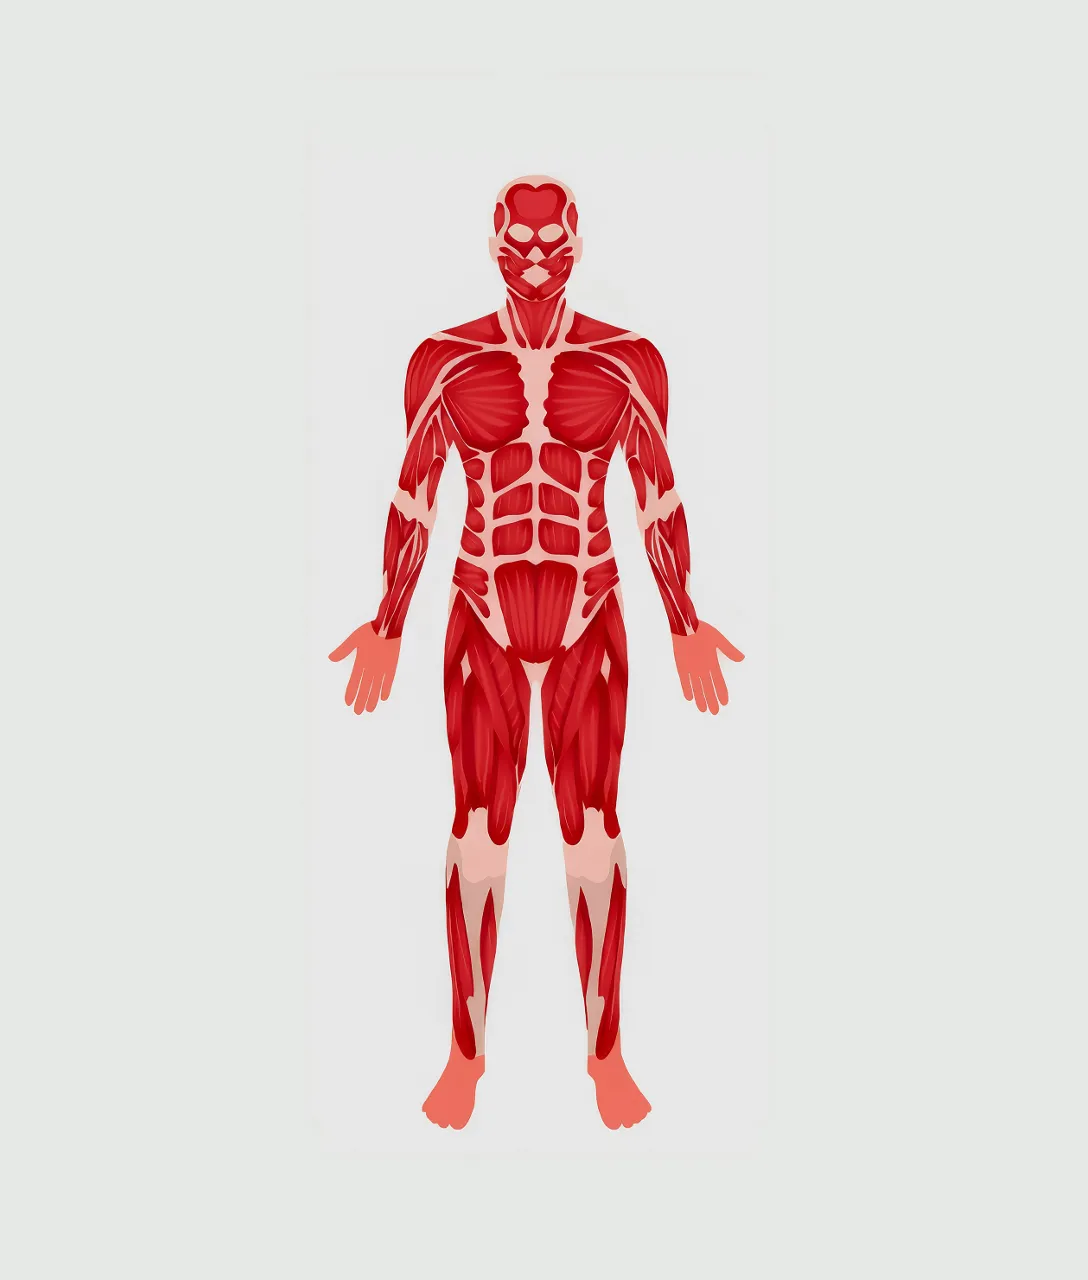 one man muscles are highlighted in red and white on a white background